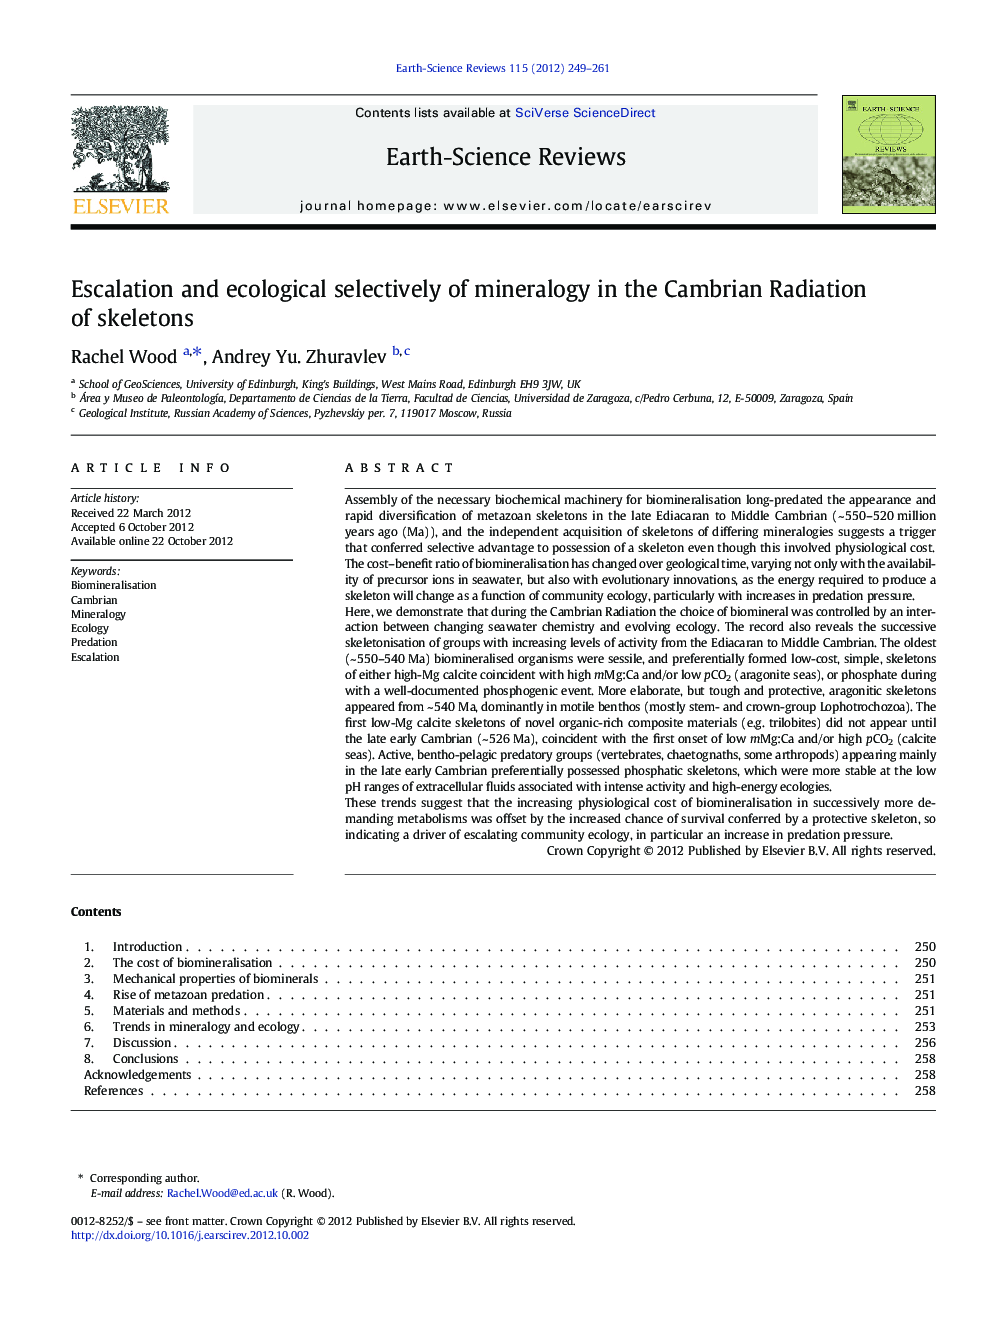 Escalation and ecological selectively of mineralogy in the Cambrian Radiation of skeletons